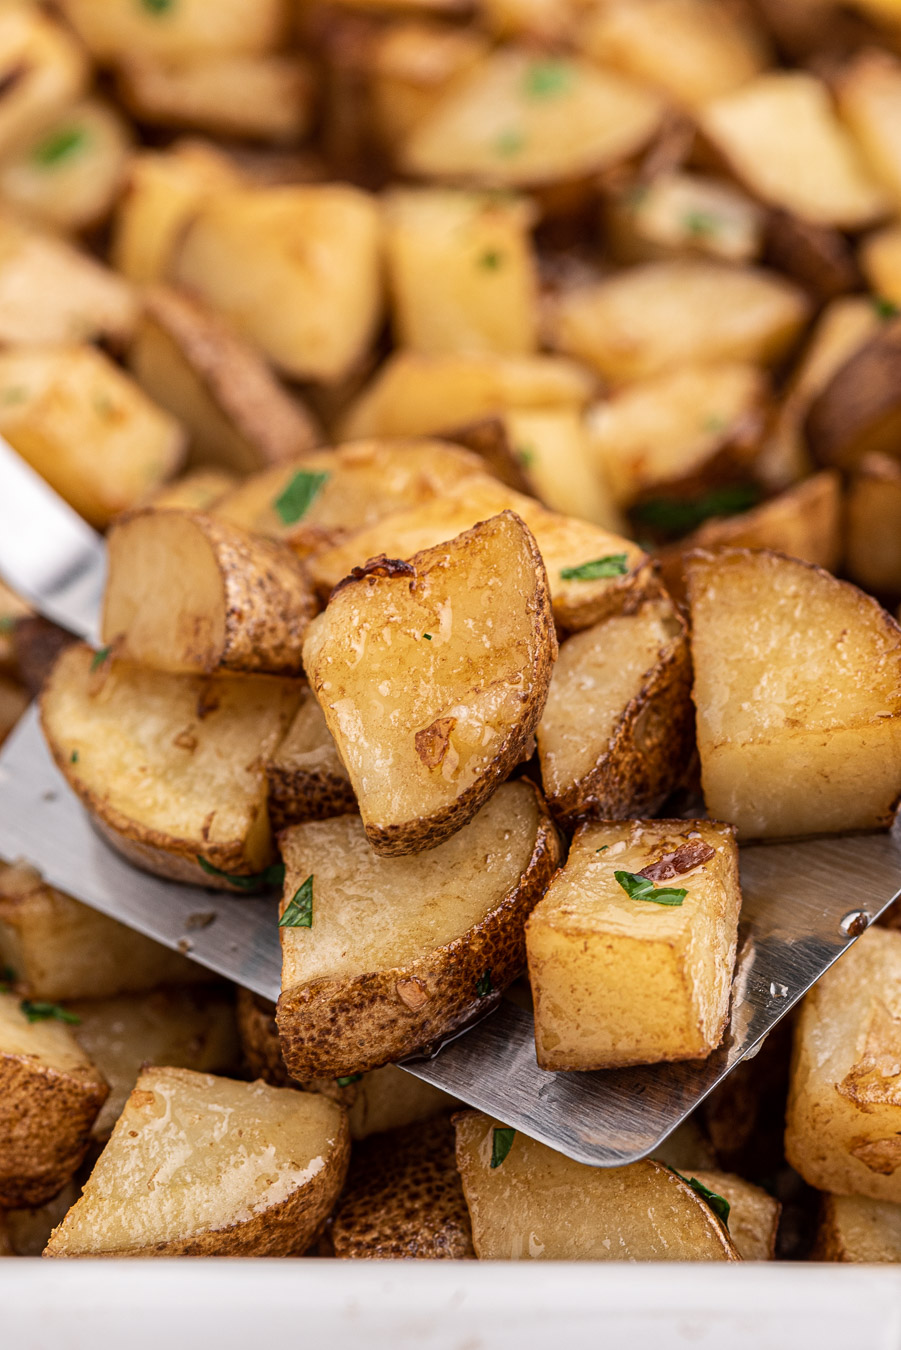 Easy roasted potatoes. spatula scooping roasted potatoes up out of a big dish of them